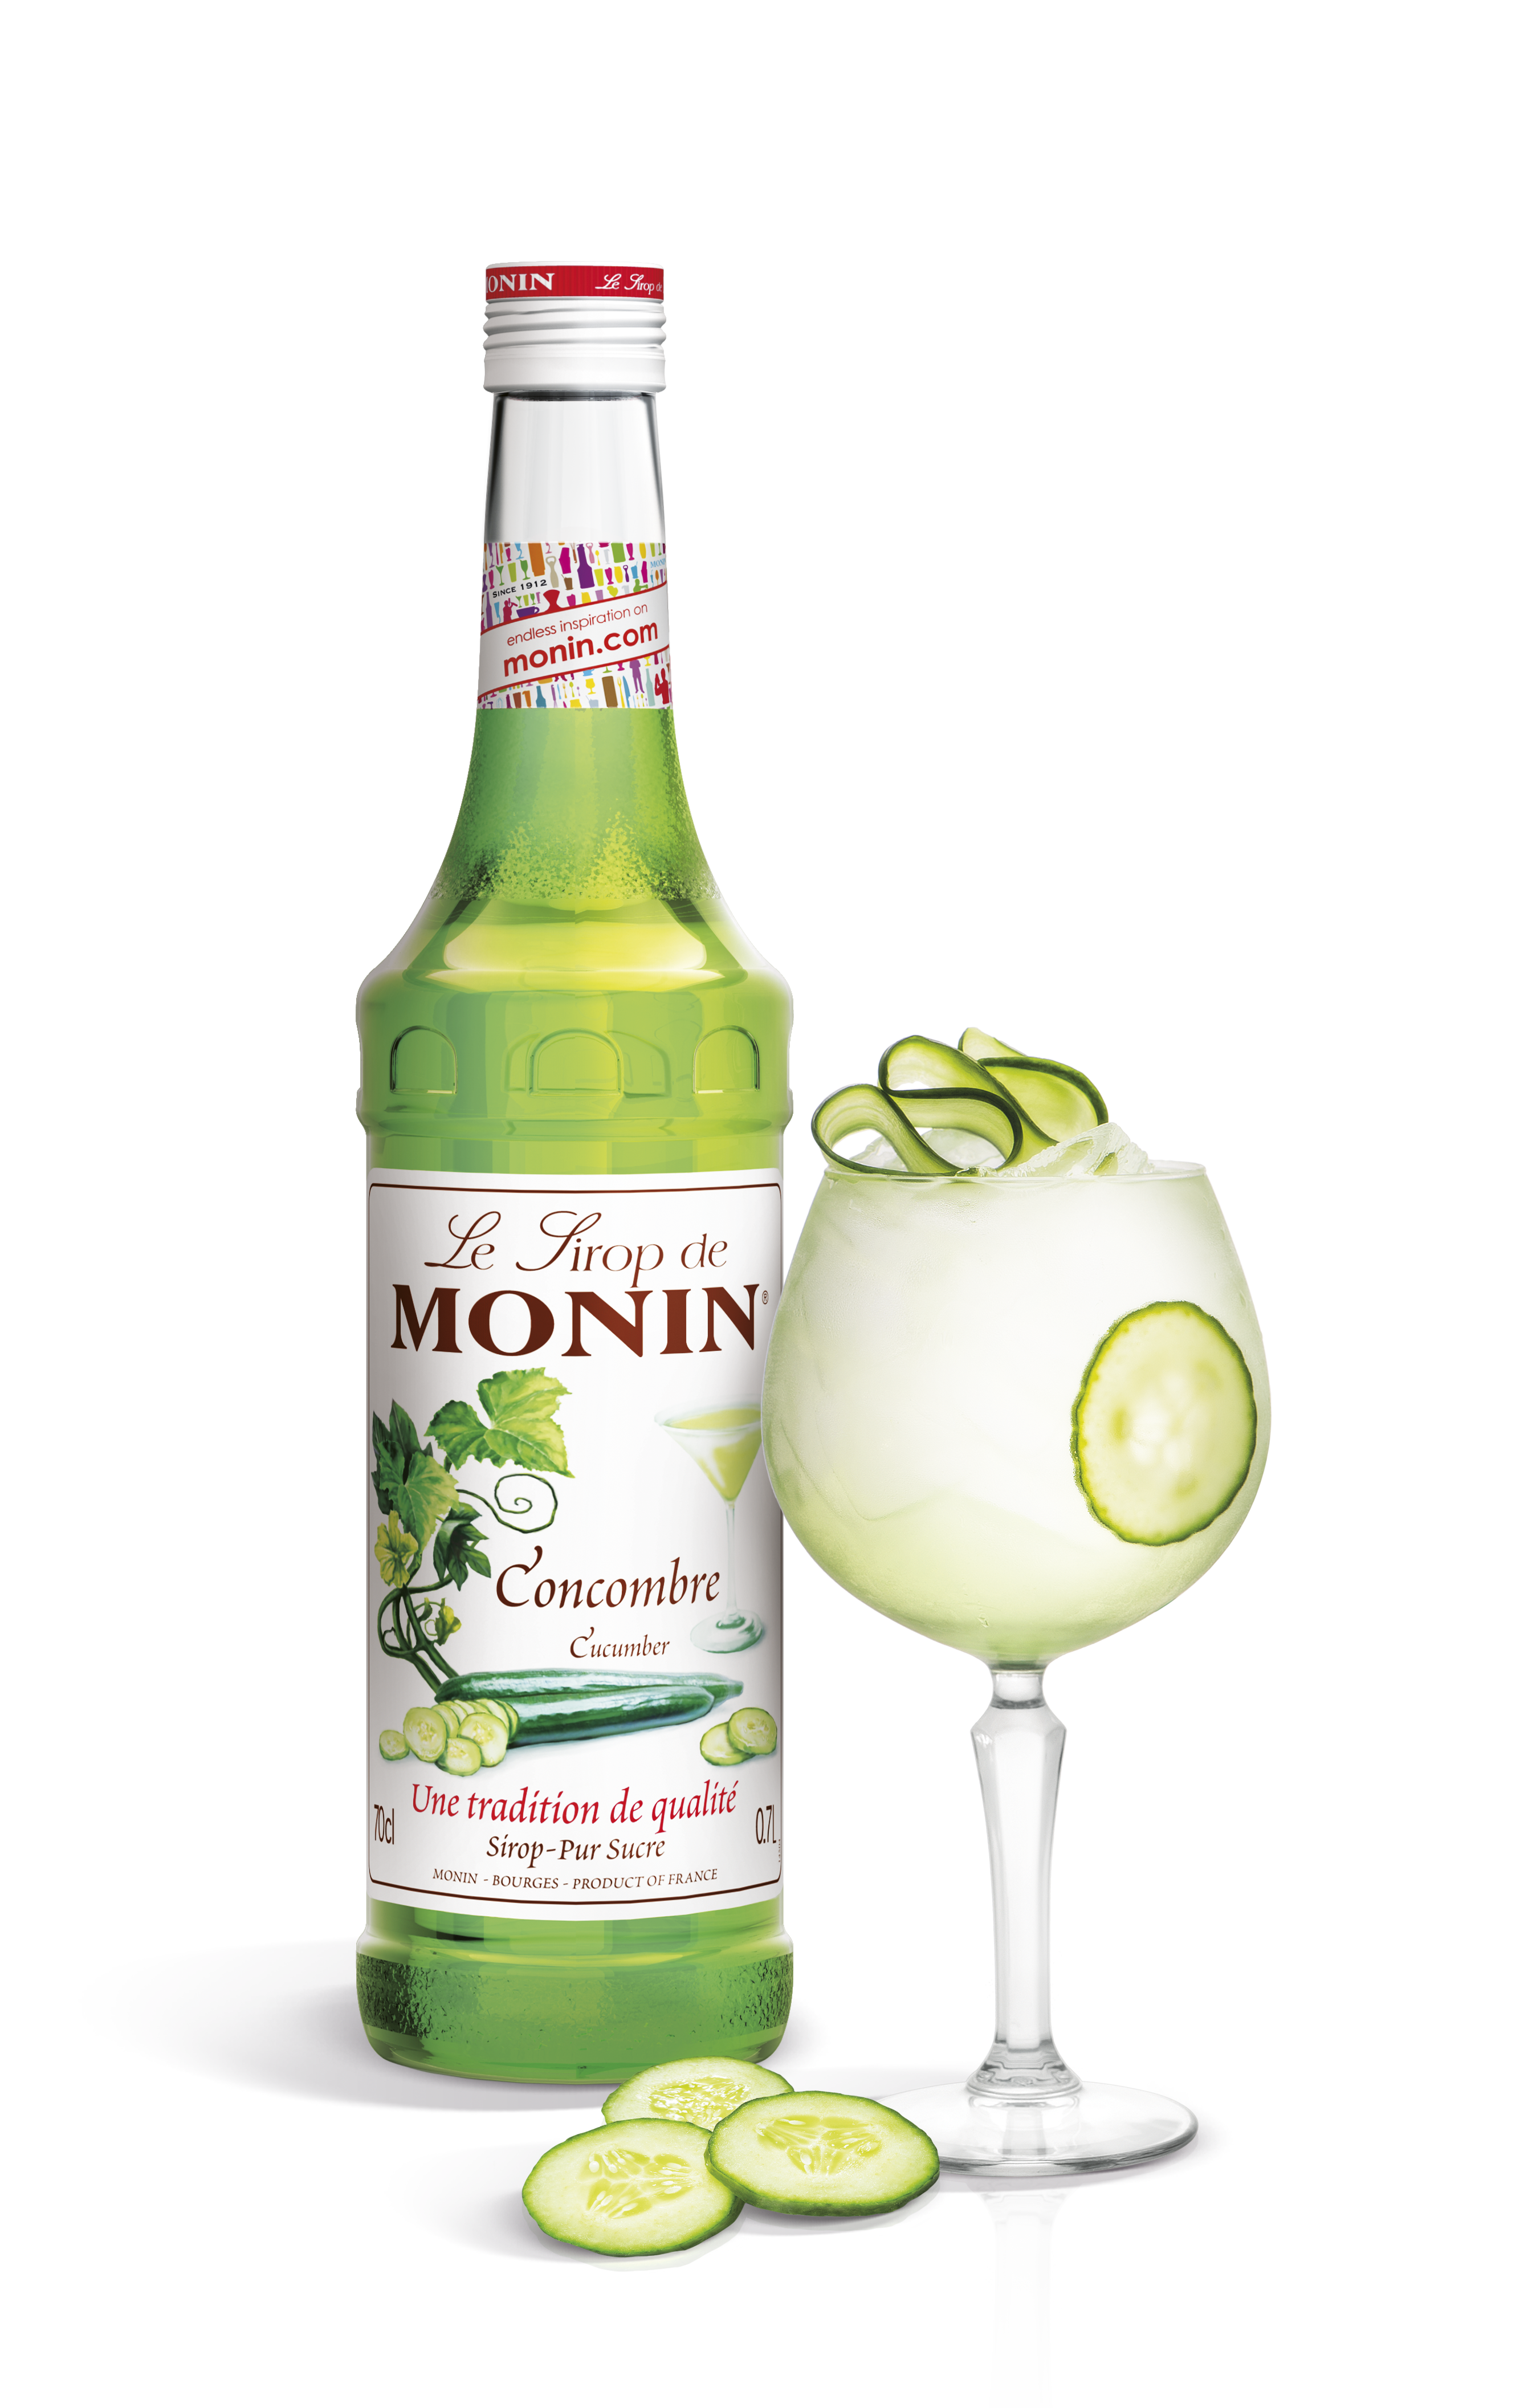 MONIN has heard you and are happy to present Cucumber Syrup